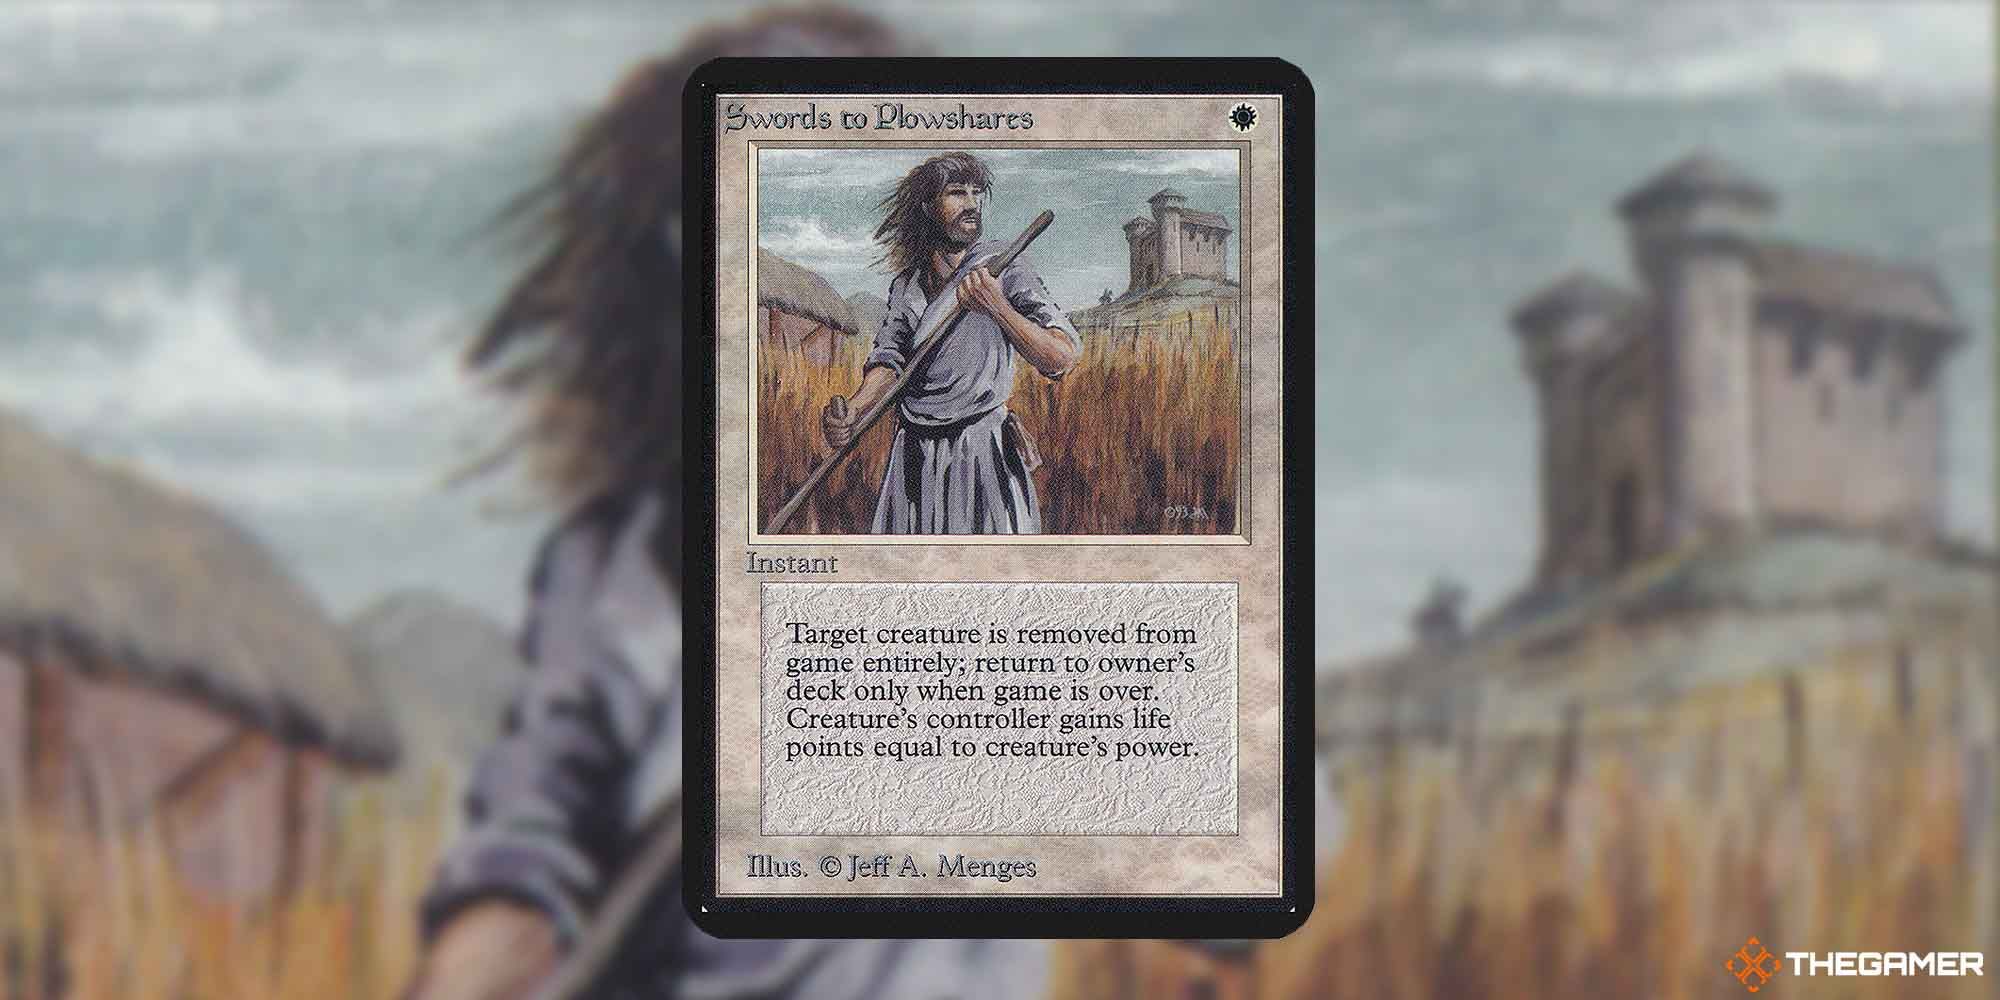 The Swords to Plowshares Instant In Magic the Gathering